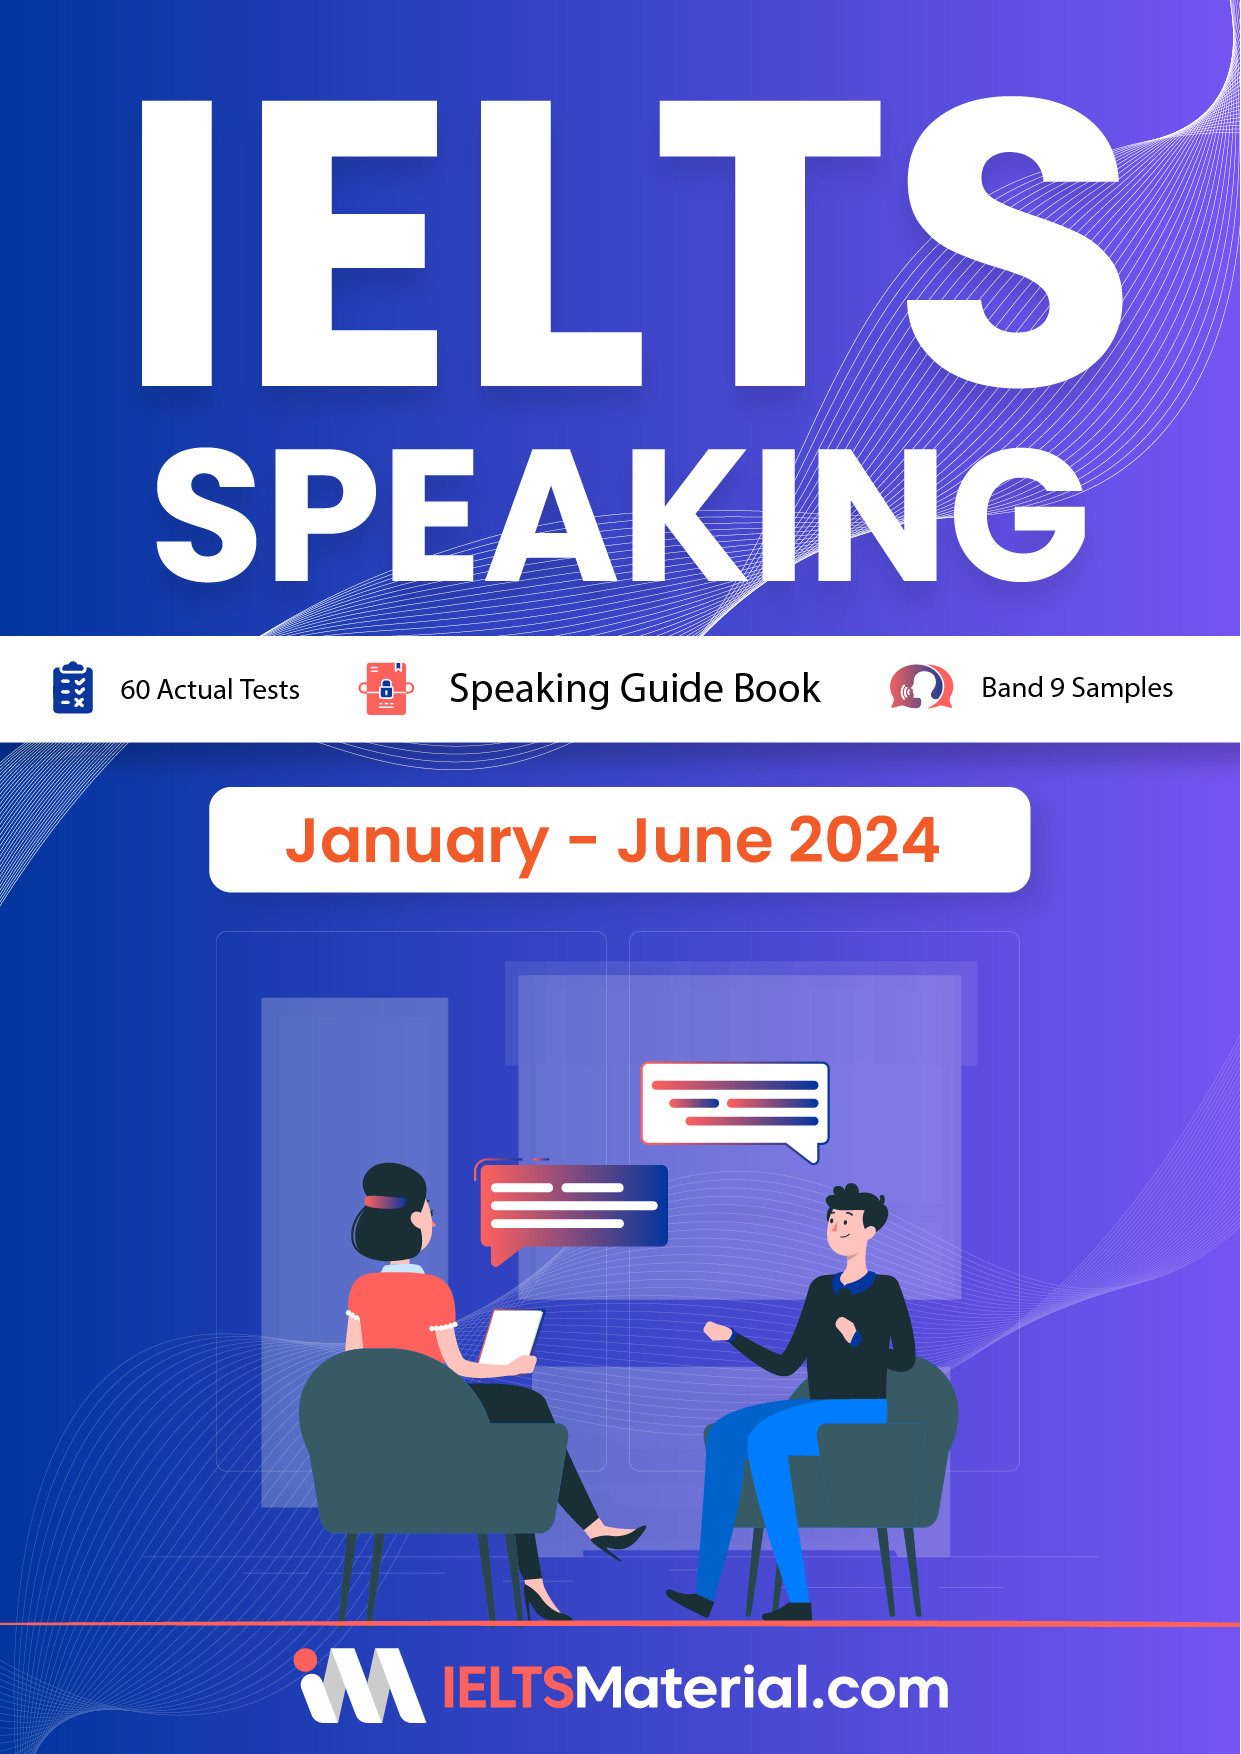 IELTS Speaking: Channeling the voice in 30 days